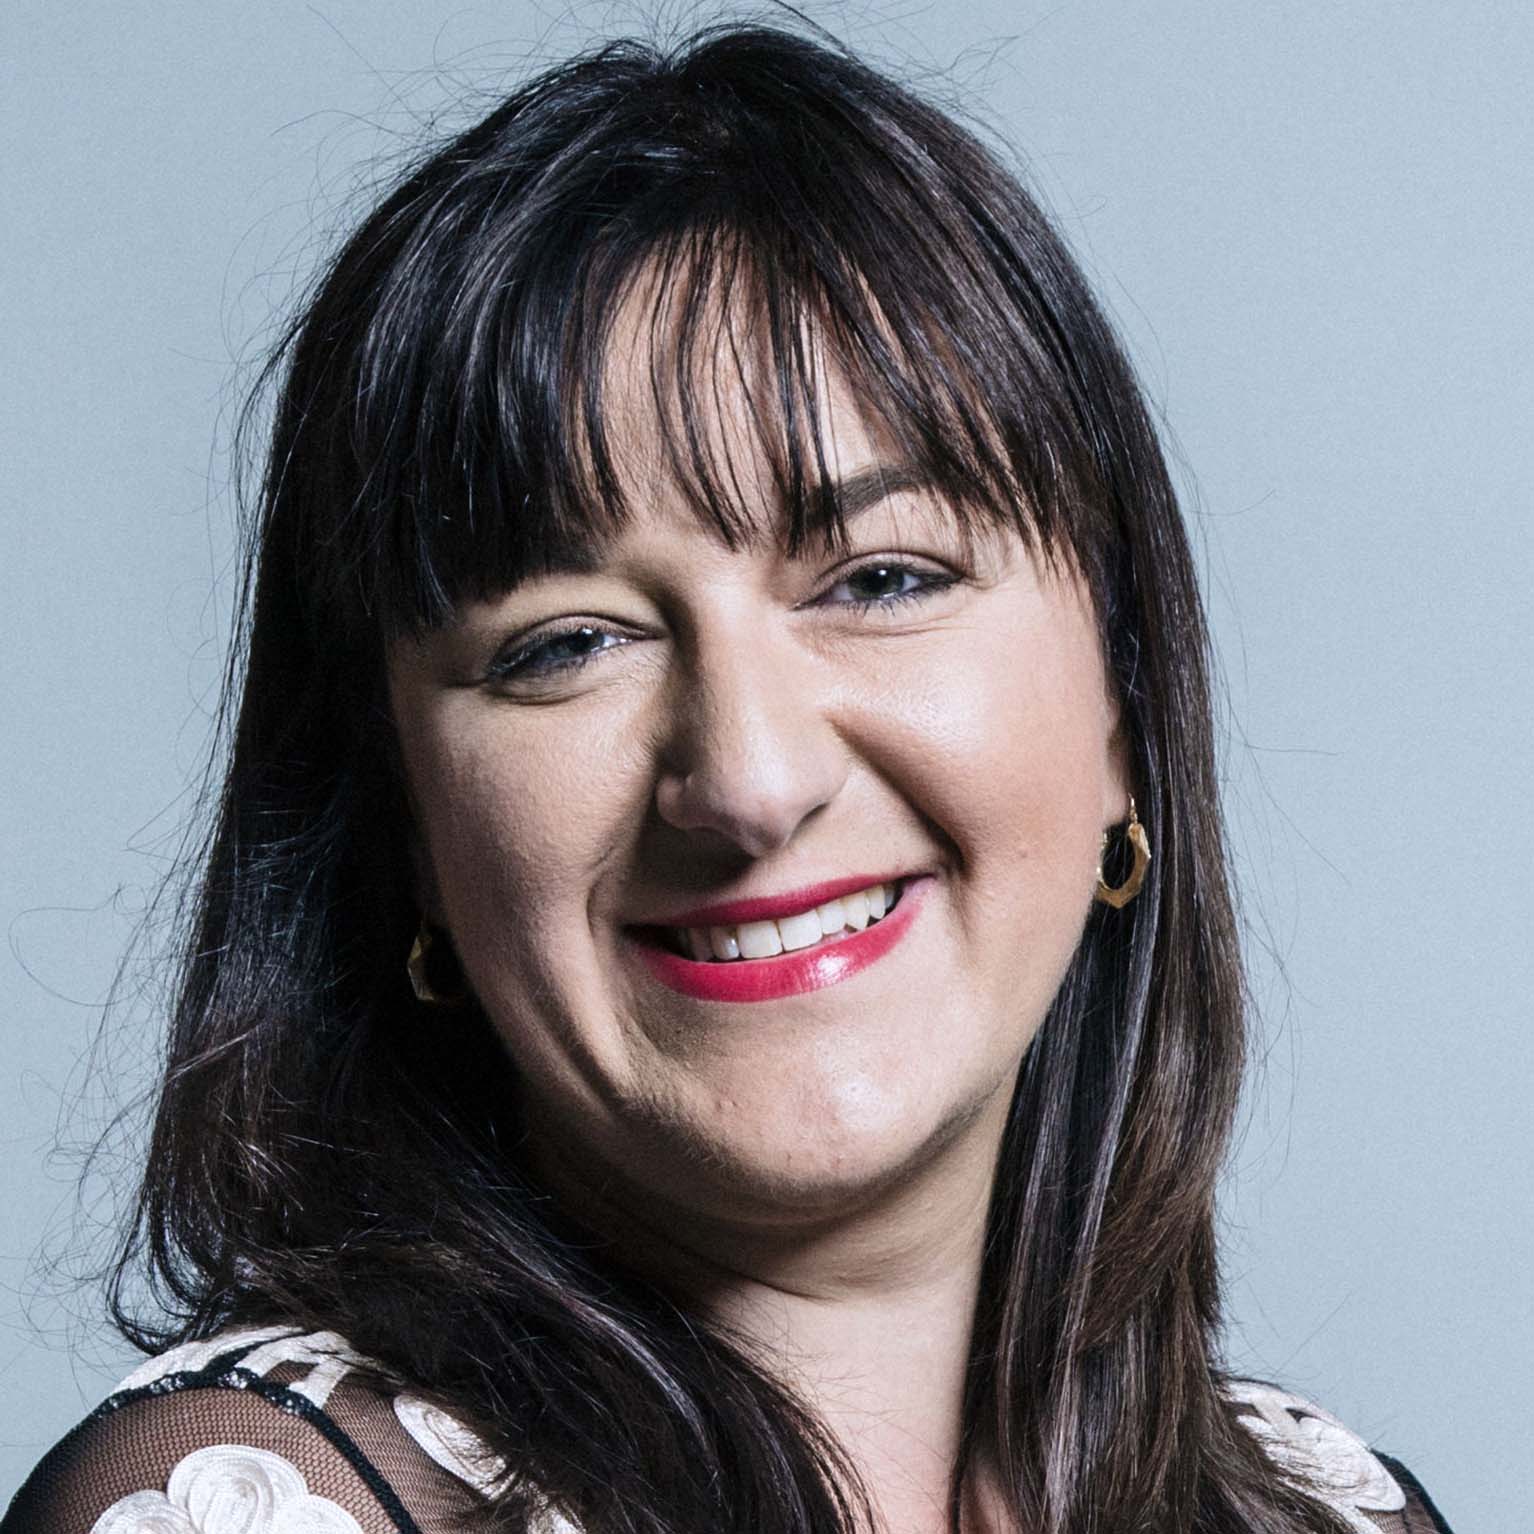 Ruth Smeeth: “From Ethiopia to Hong Kong, we will not abandon you”